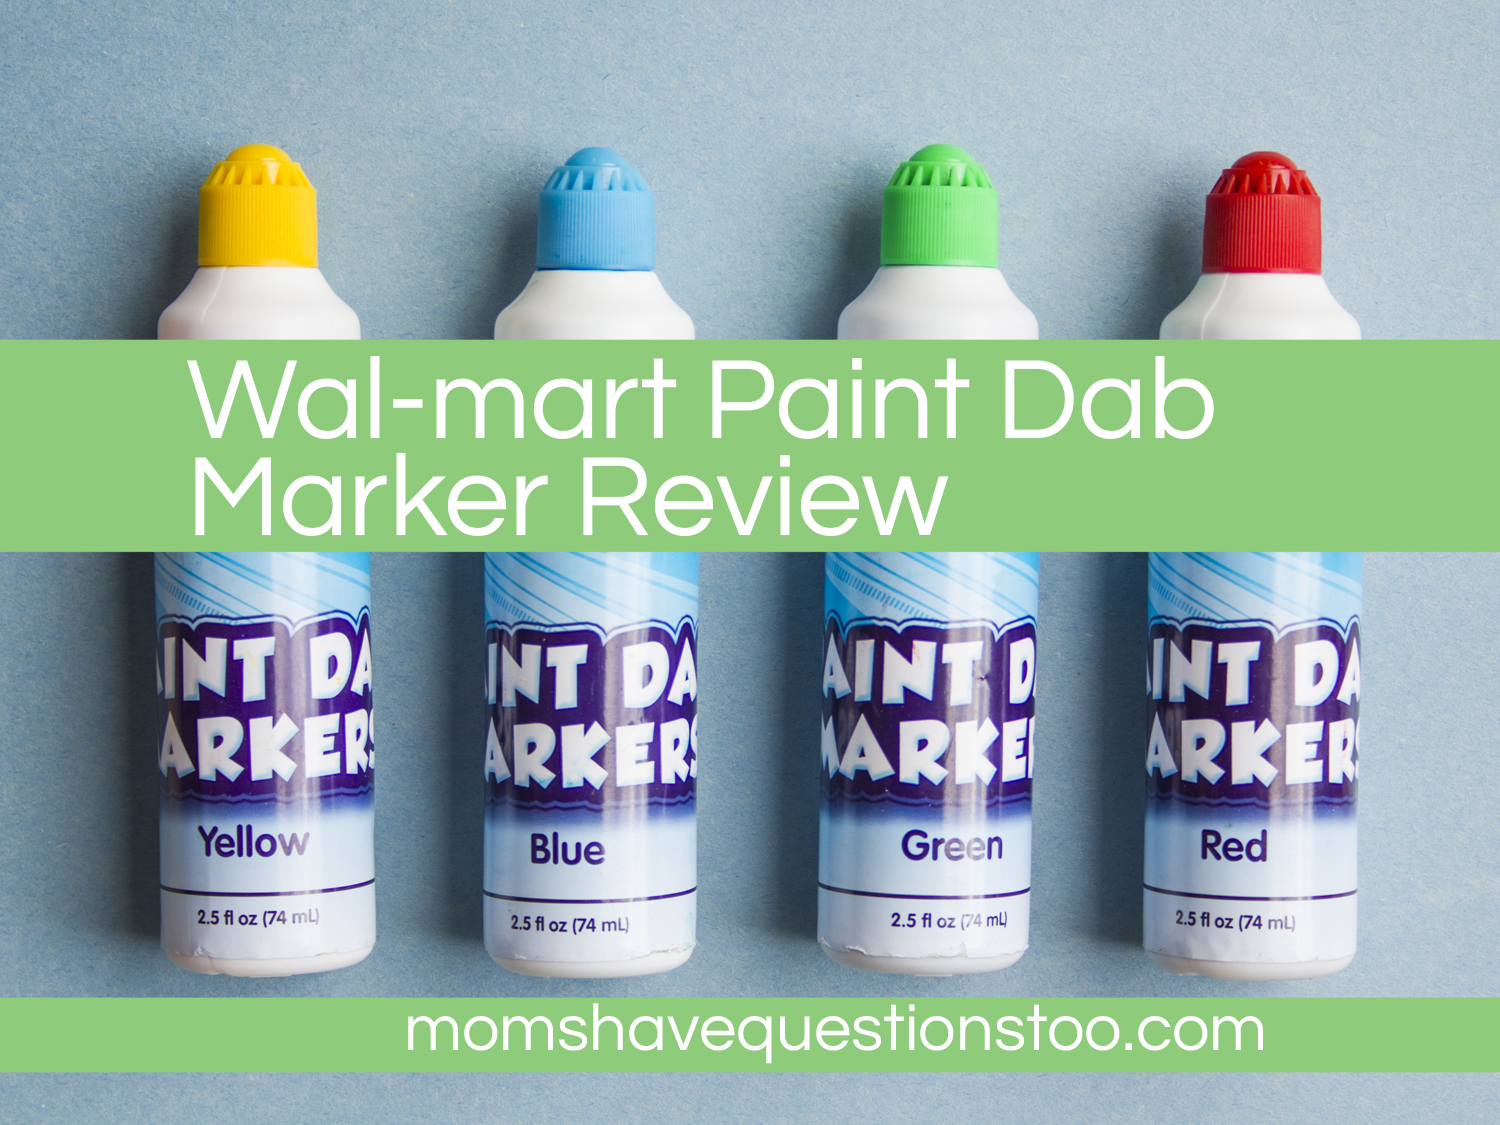 Review of Walmart Paint Dab Markers